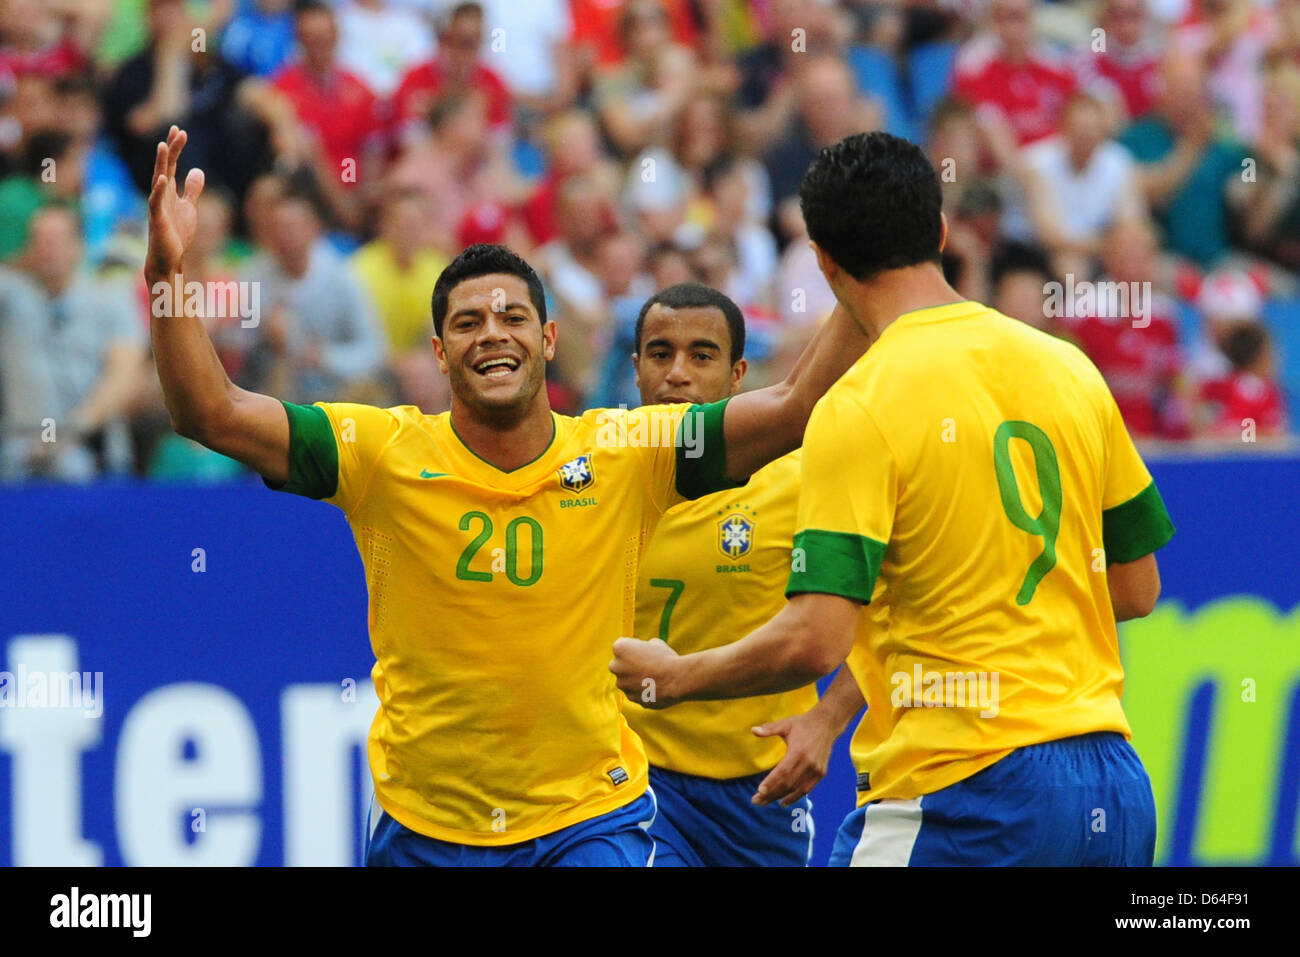 Brazil's Hulk (L) cheers after scoring the 3-0 goal during the international friendly soccer match between Denmark and Brazil at Imtech Arena in Hamburg, Germany, 26 may 2012. Photo: Revierfoto Stock Photo